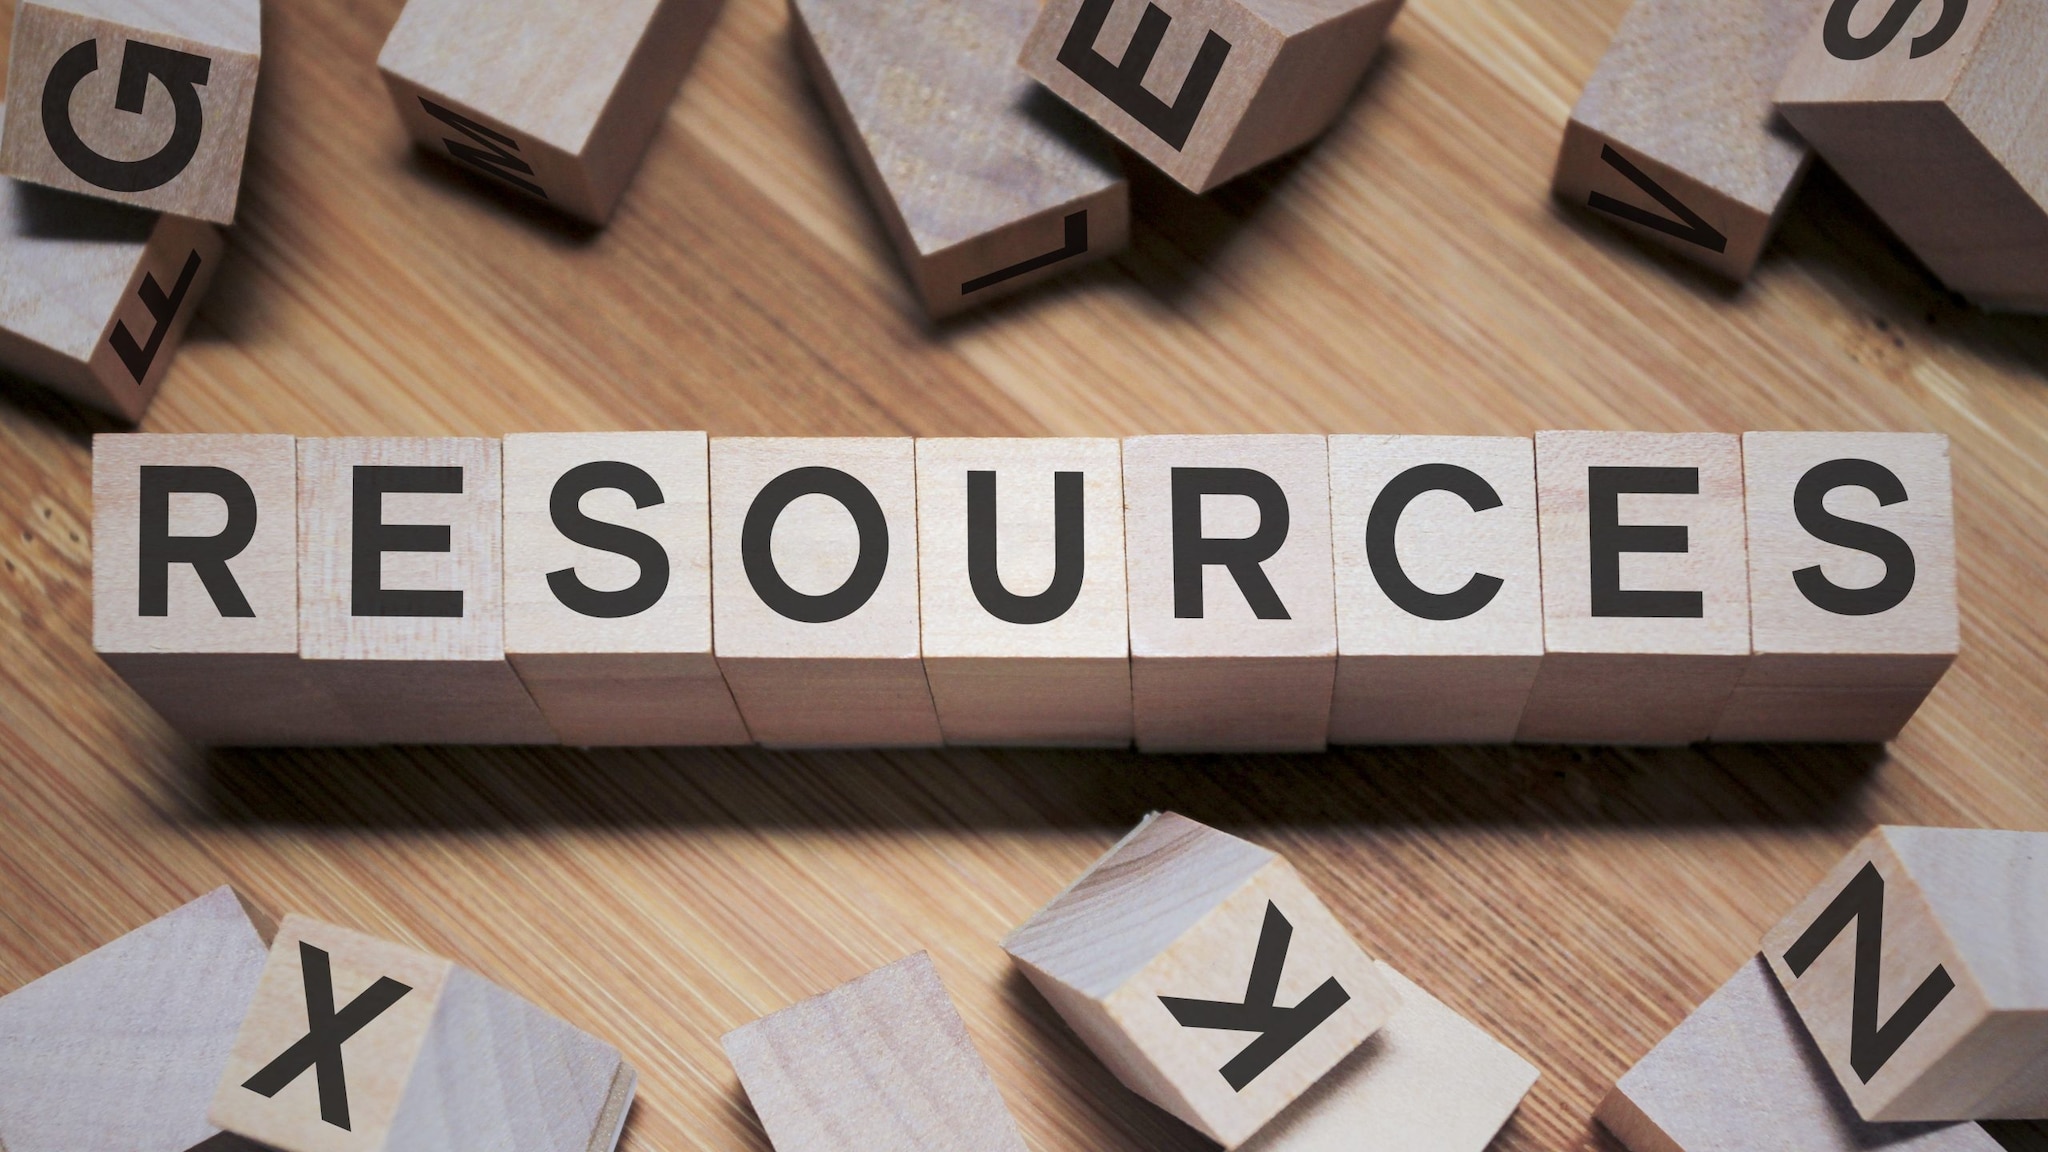 "Resources" spelled out in wooden blocks